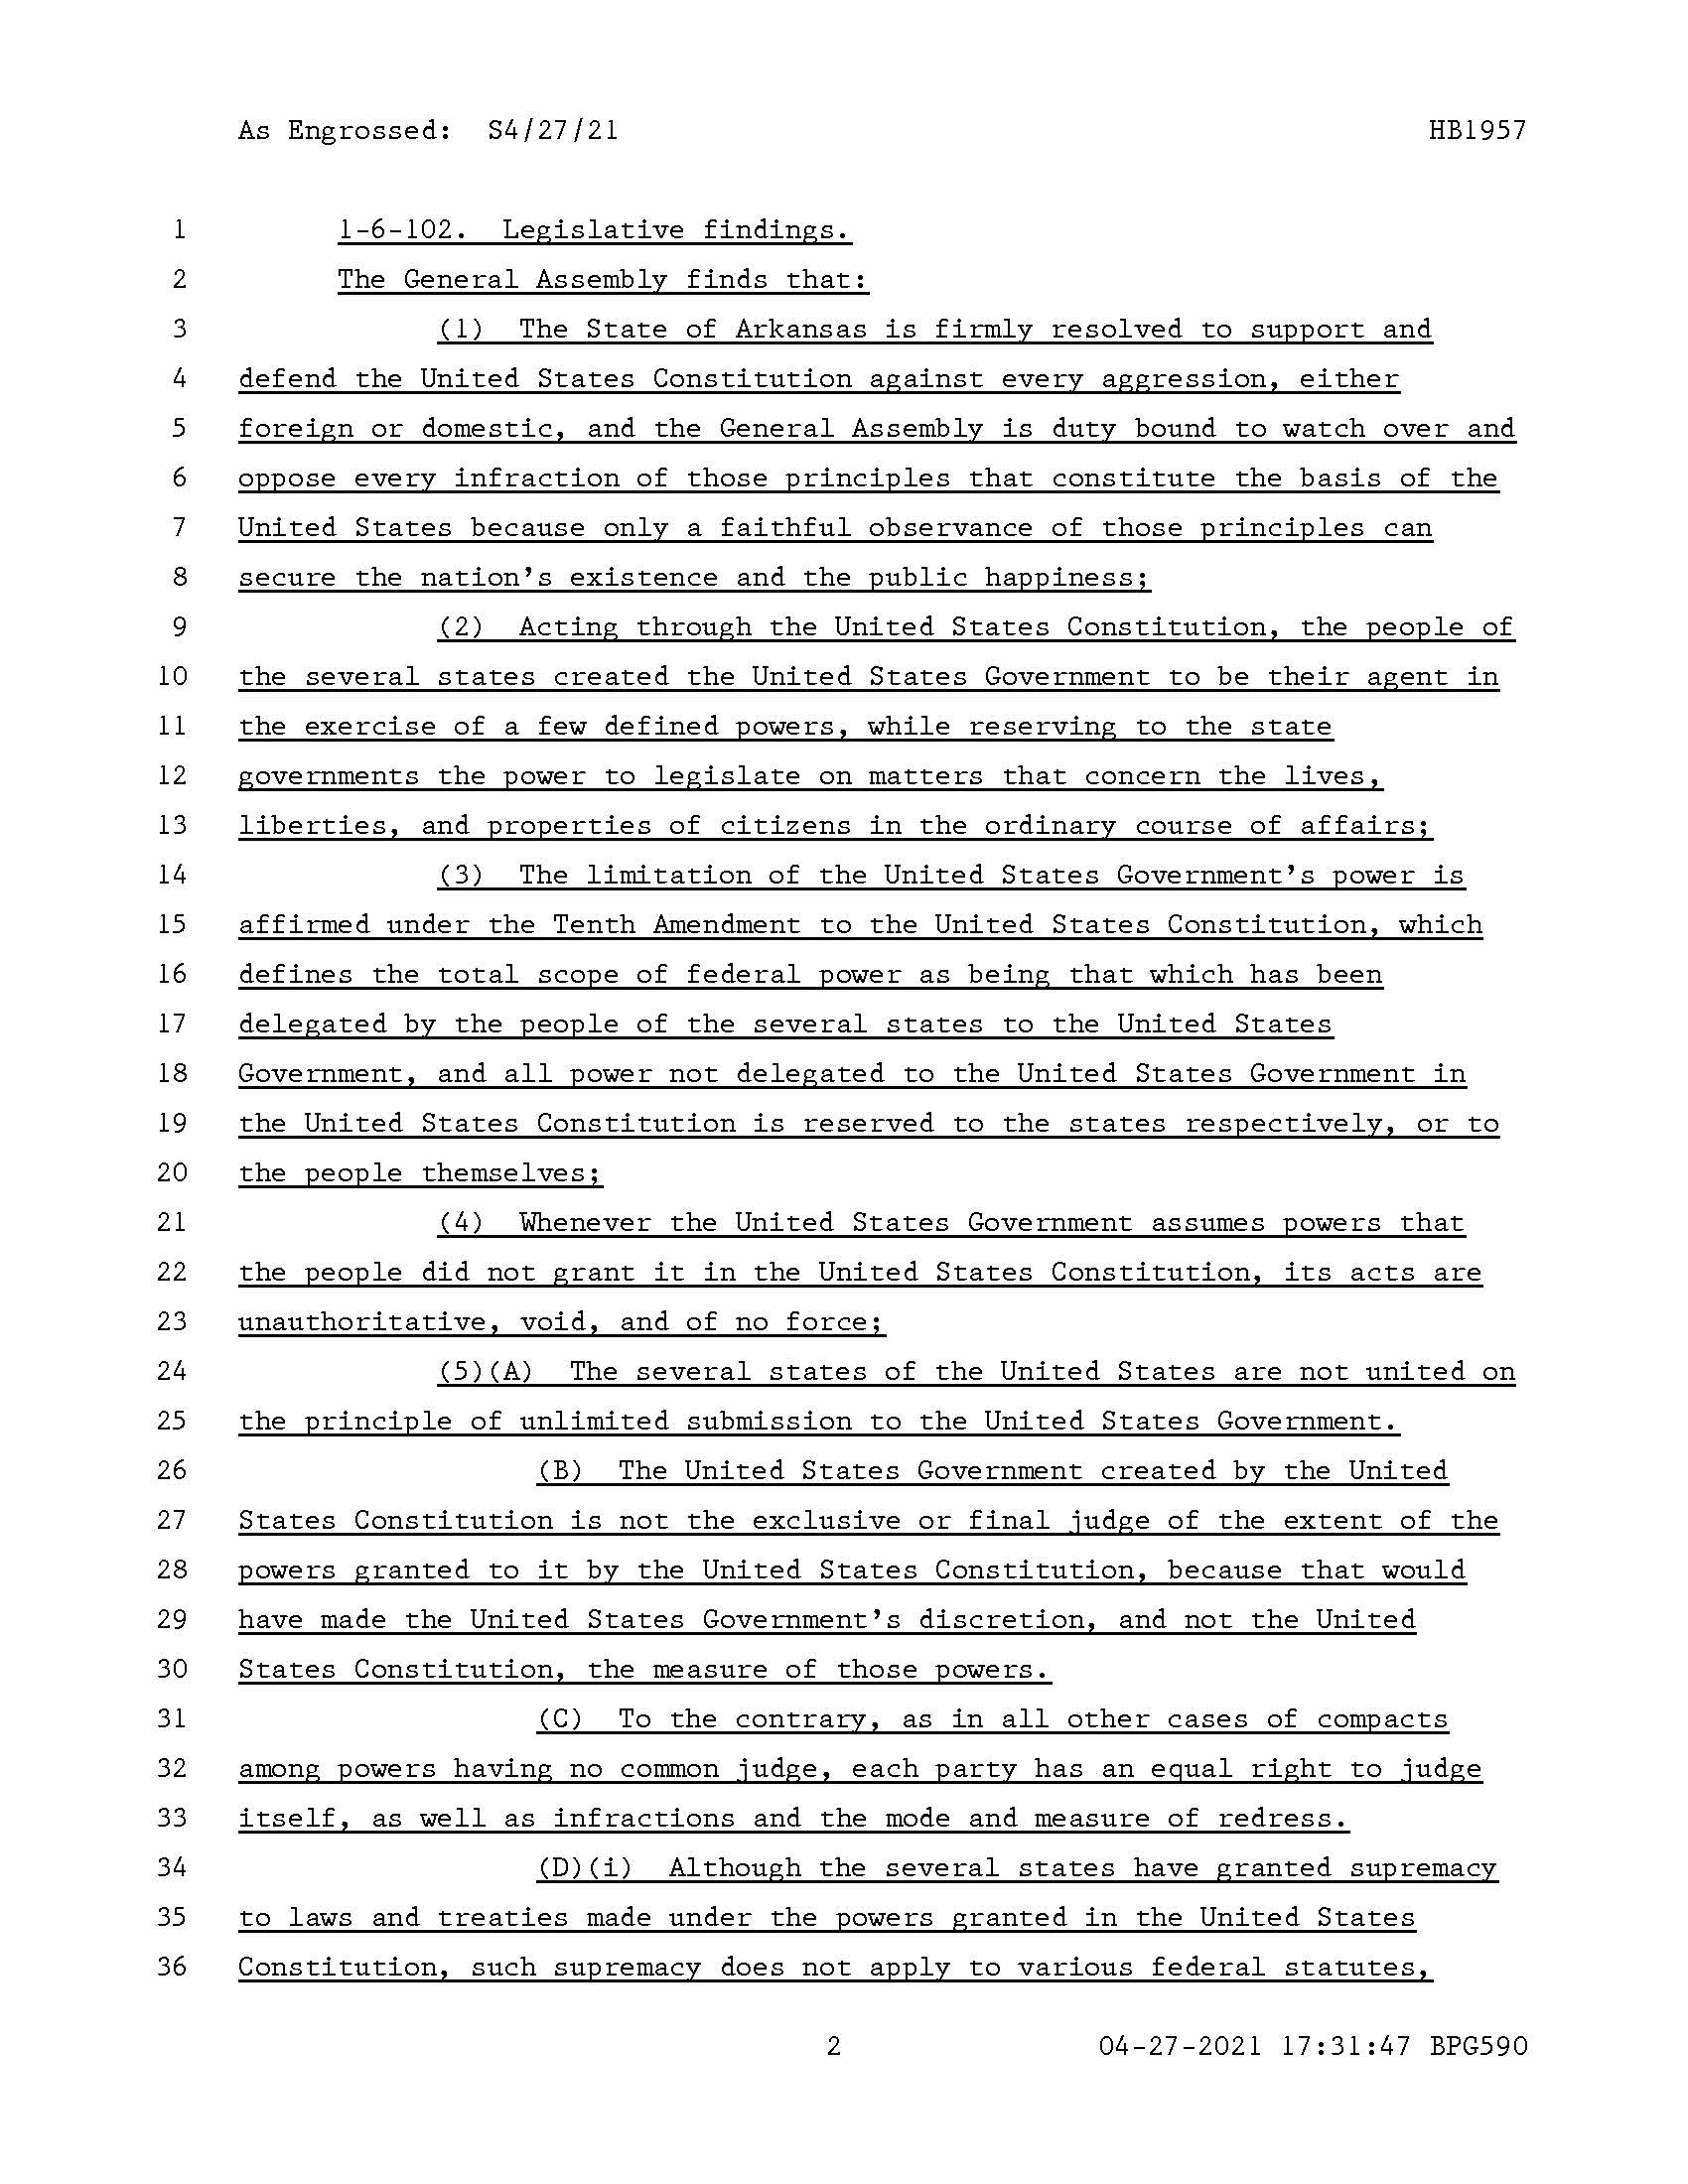 Arkansas Act1012 - CONCERNING THE ENFORCEMENT OF FEDERAL FIREARM BANS WITHIN THE STATE OF ARKANSAS - CONCERNING STATE CONSTITUTIONAL RIGHTS Page 2